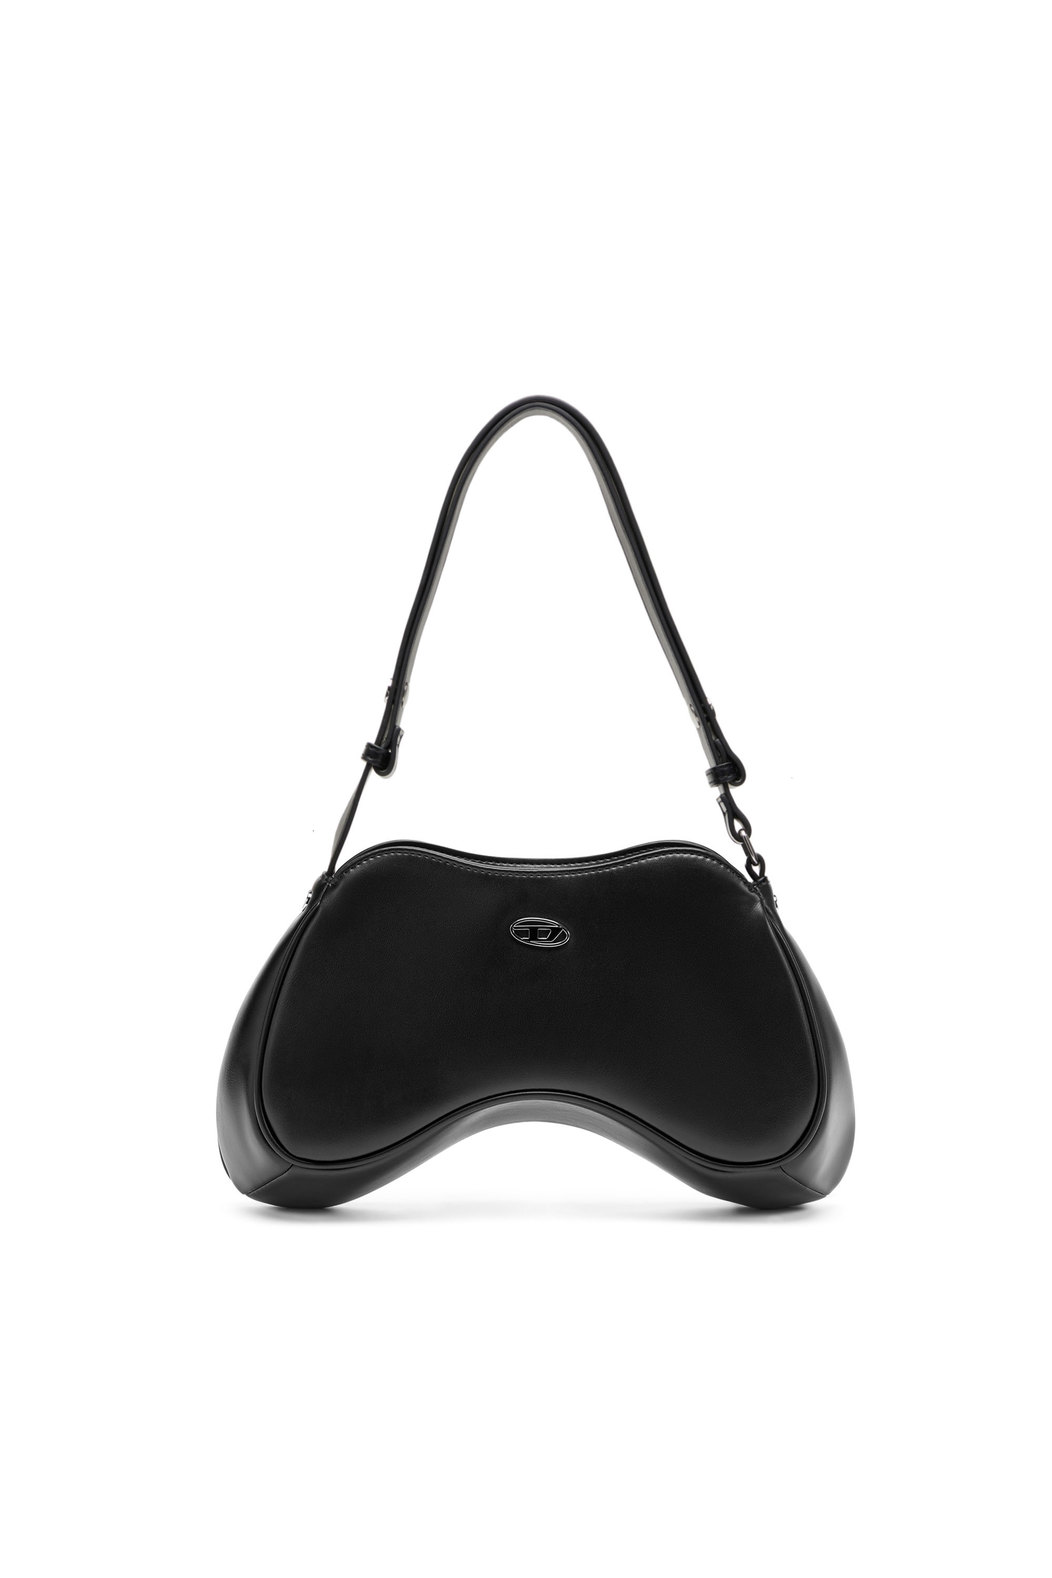 PLAY SHOULDER Woman: Shoulder bag with two-tone design